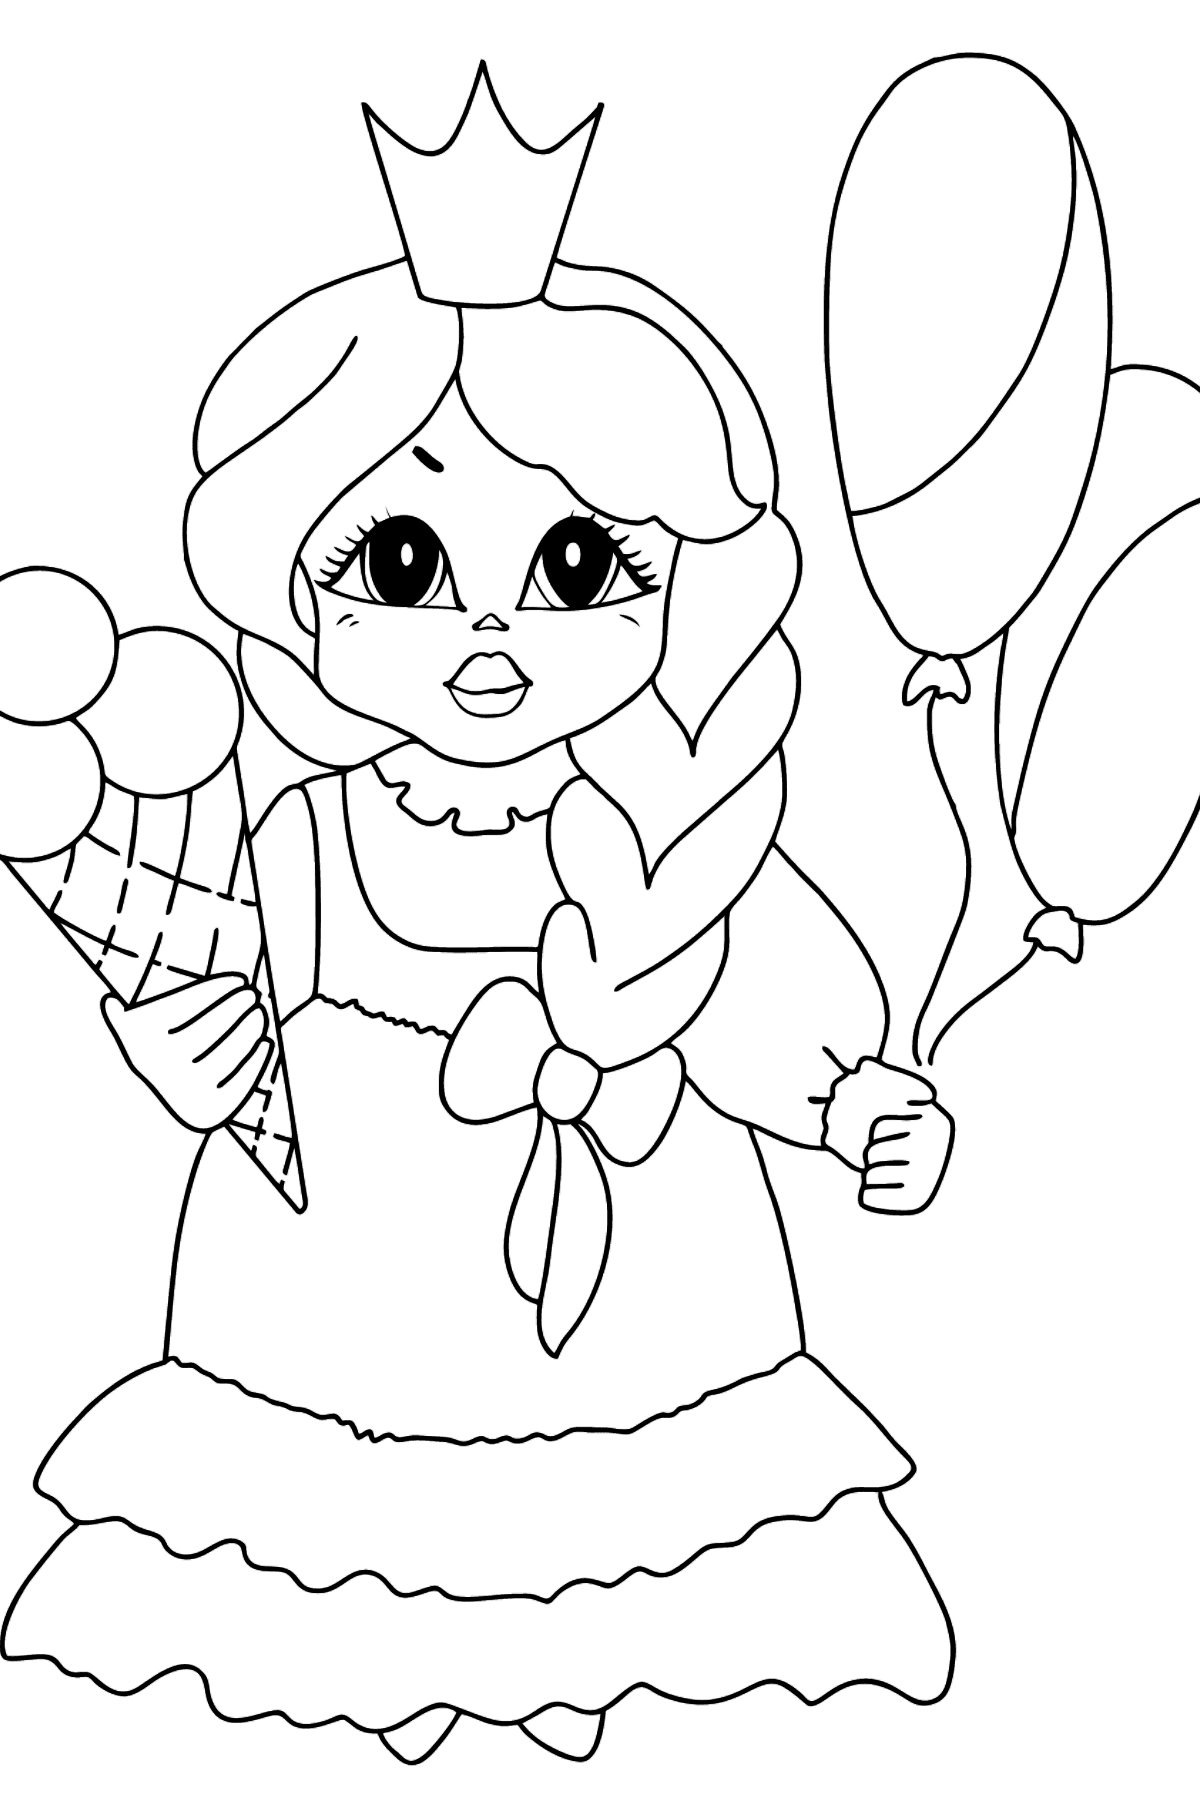 Coloring Page - A Princess with Ice Сream - For Girls - Coloring Pages for Kids